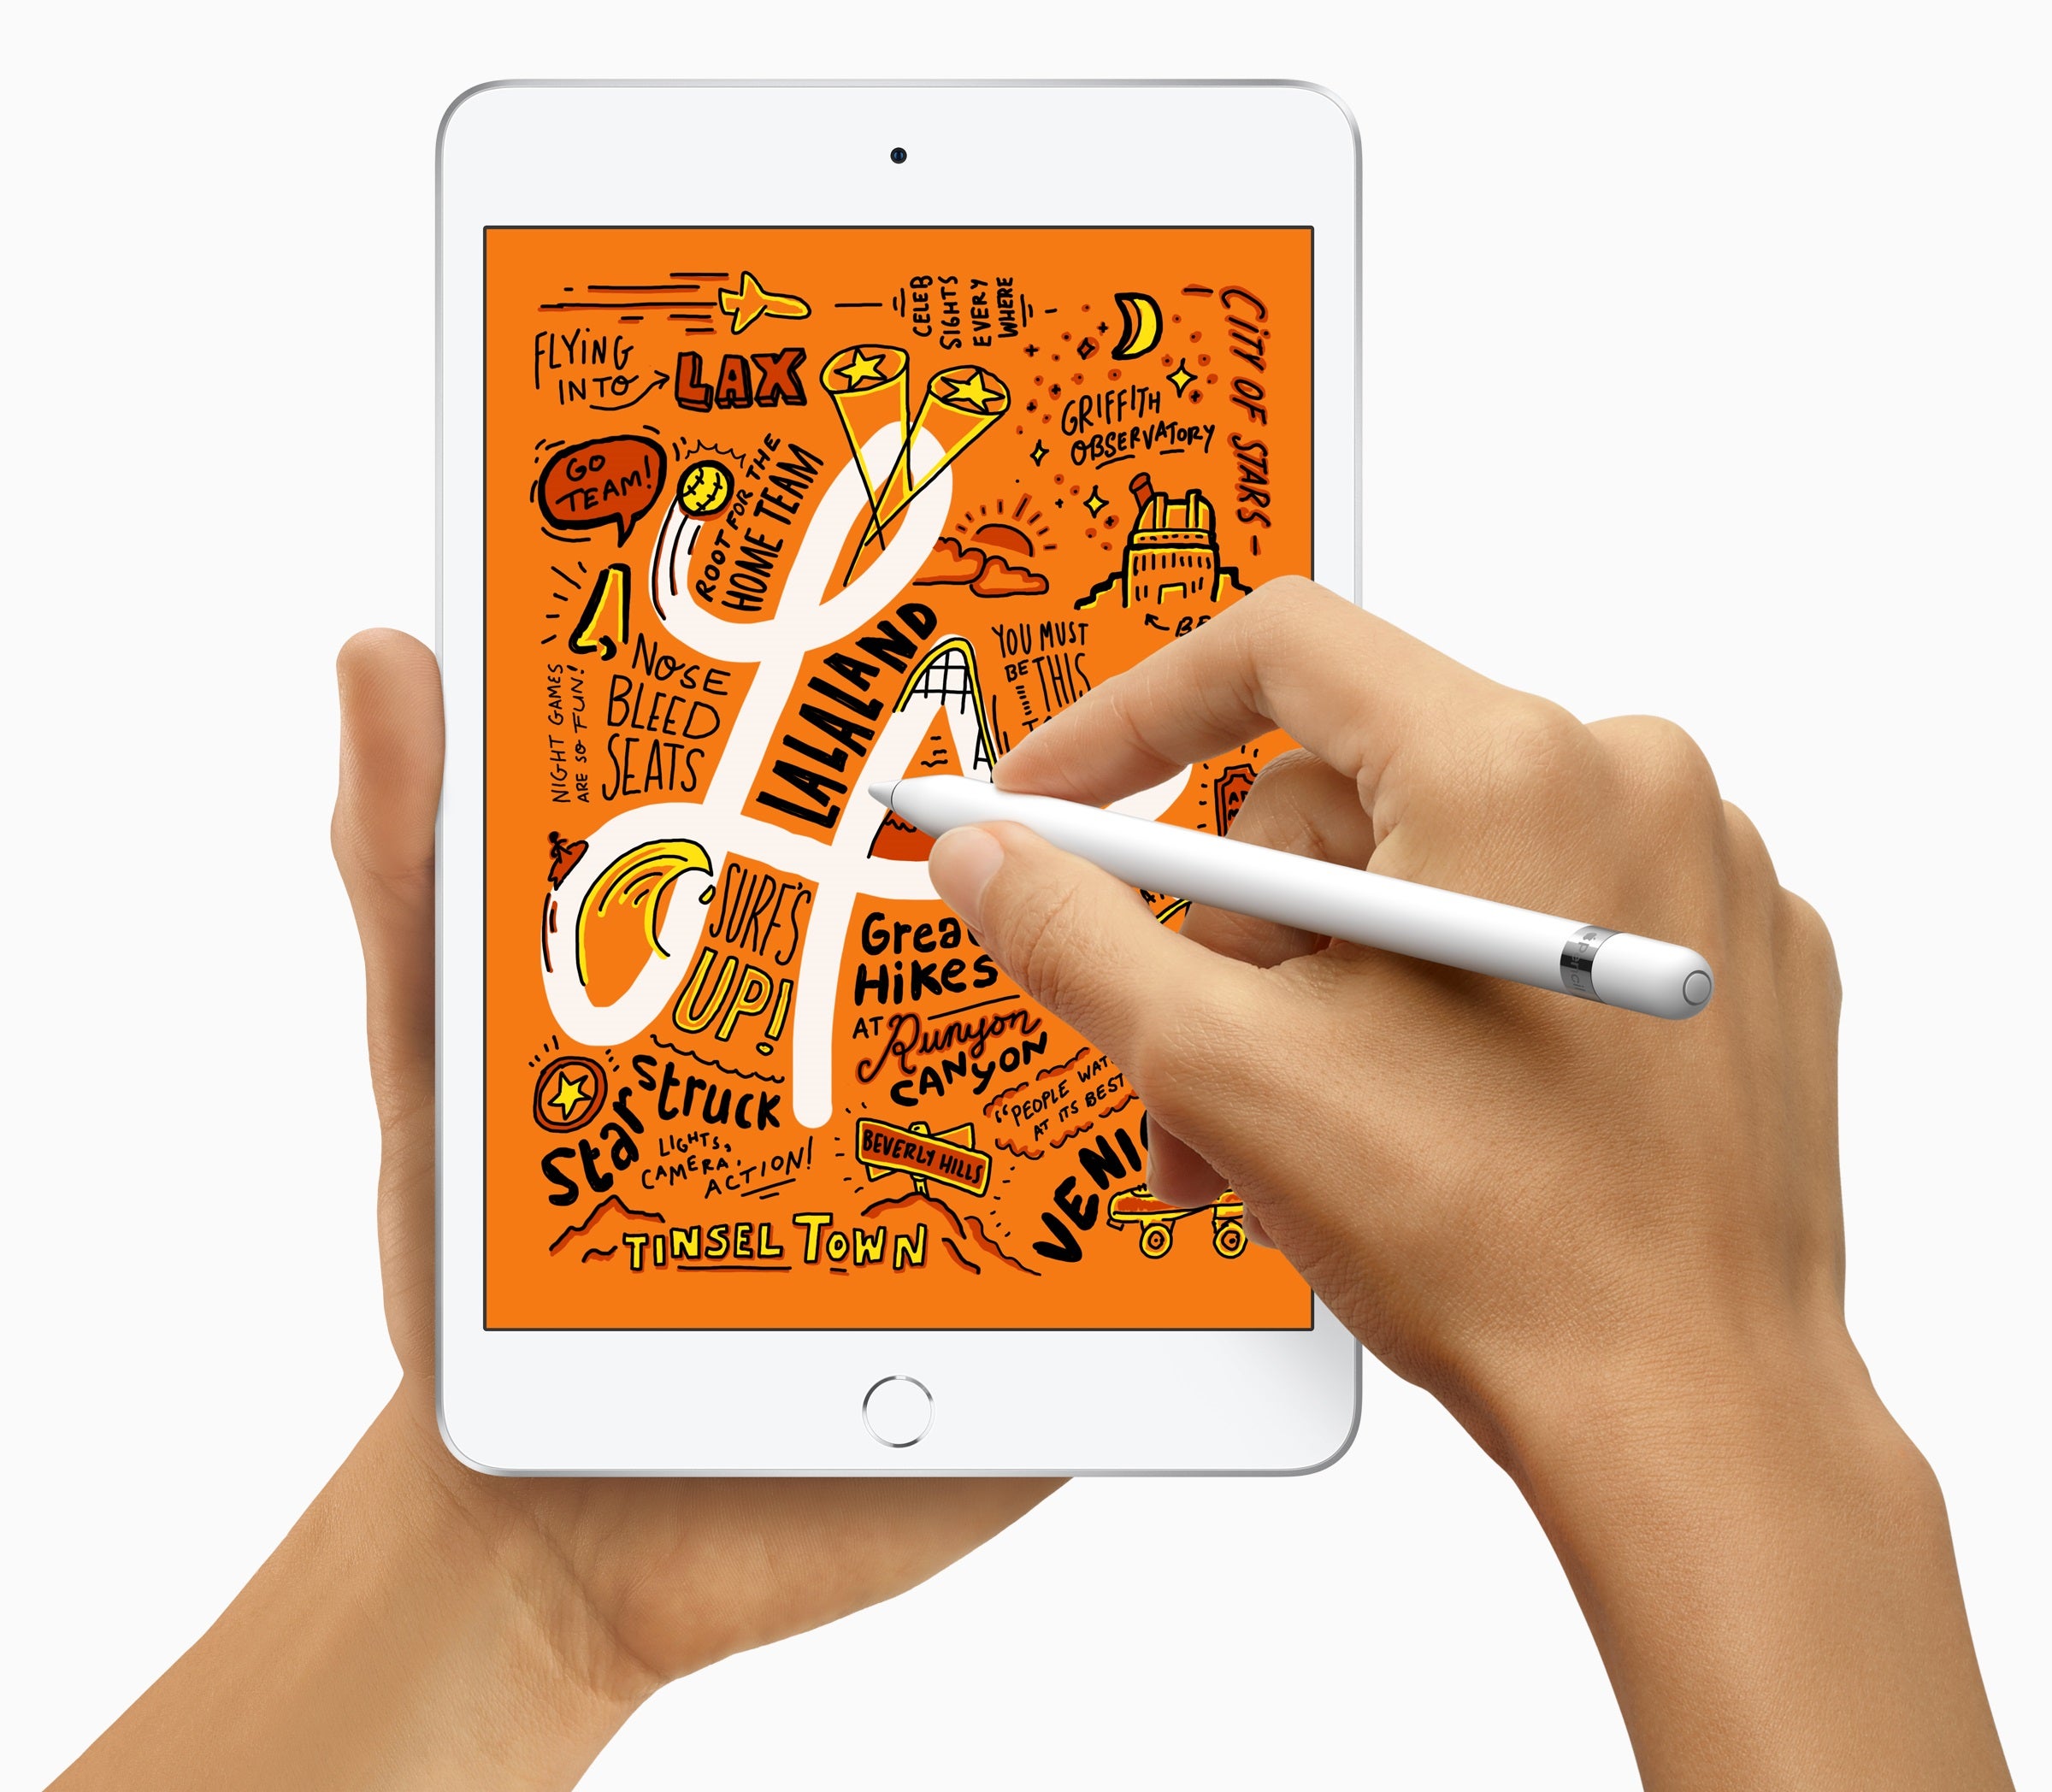 The new iPad Mini also comes with Apple Pencil support